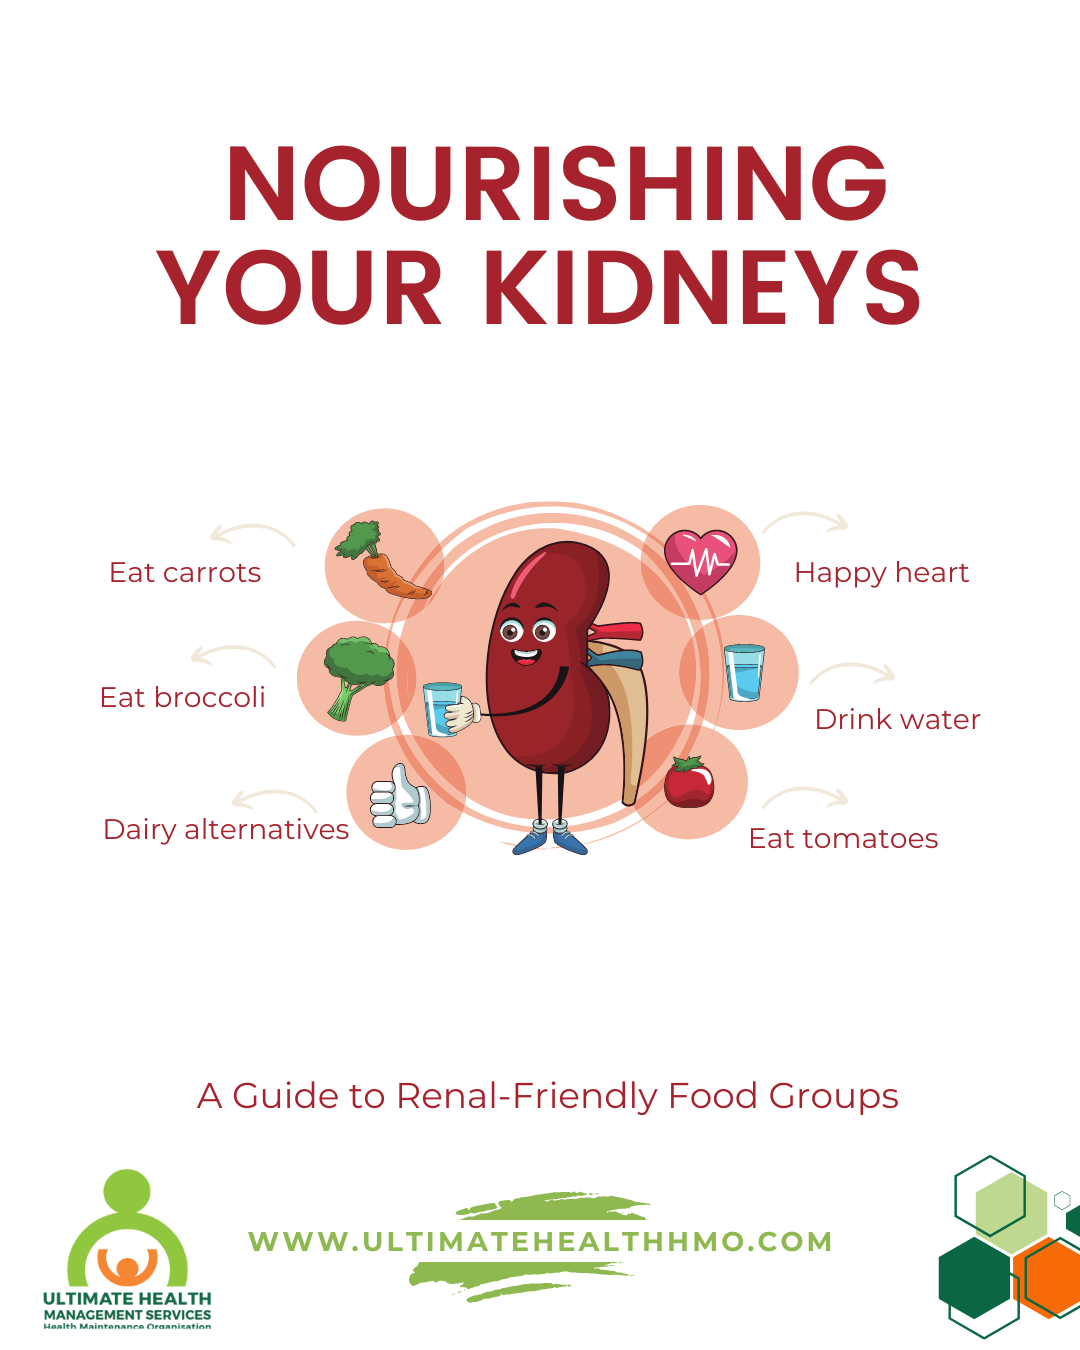 Nourishing Your Kidneys: A Guide to Renal-Friendly Food Groups